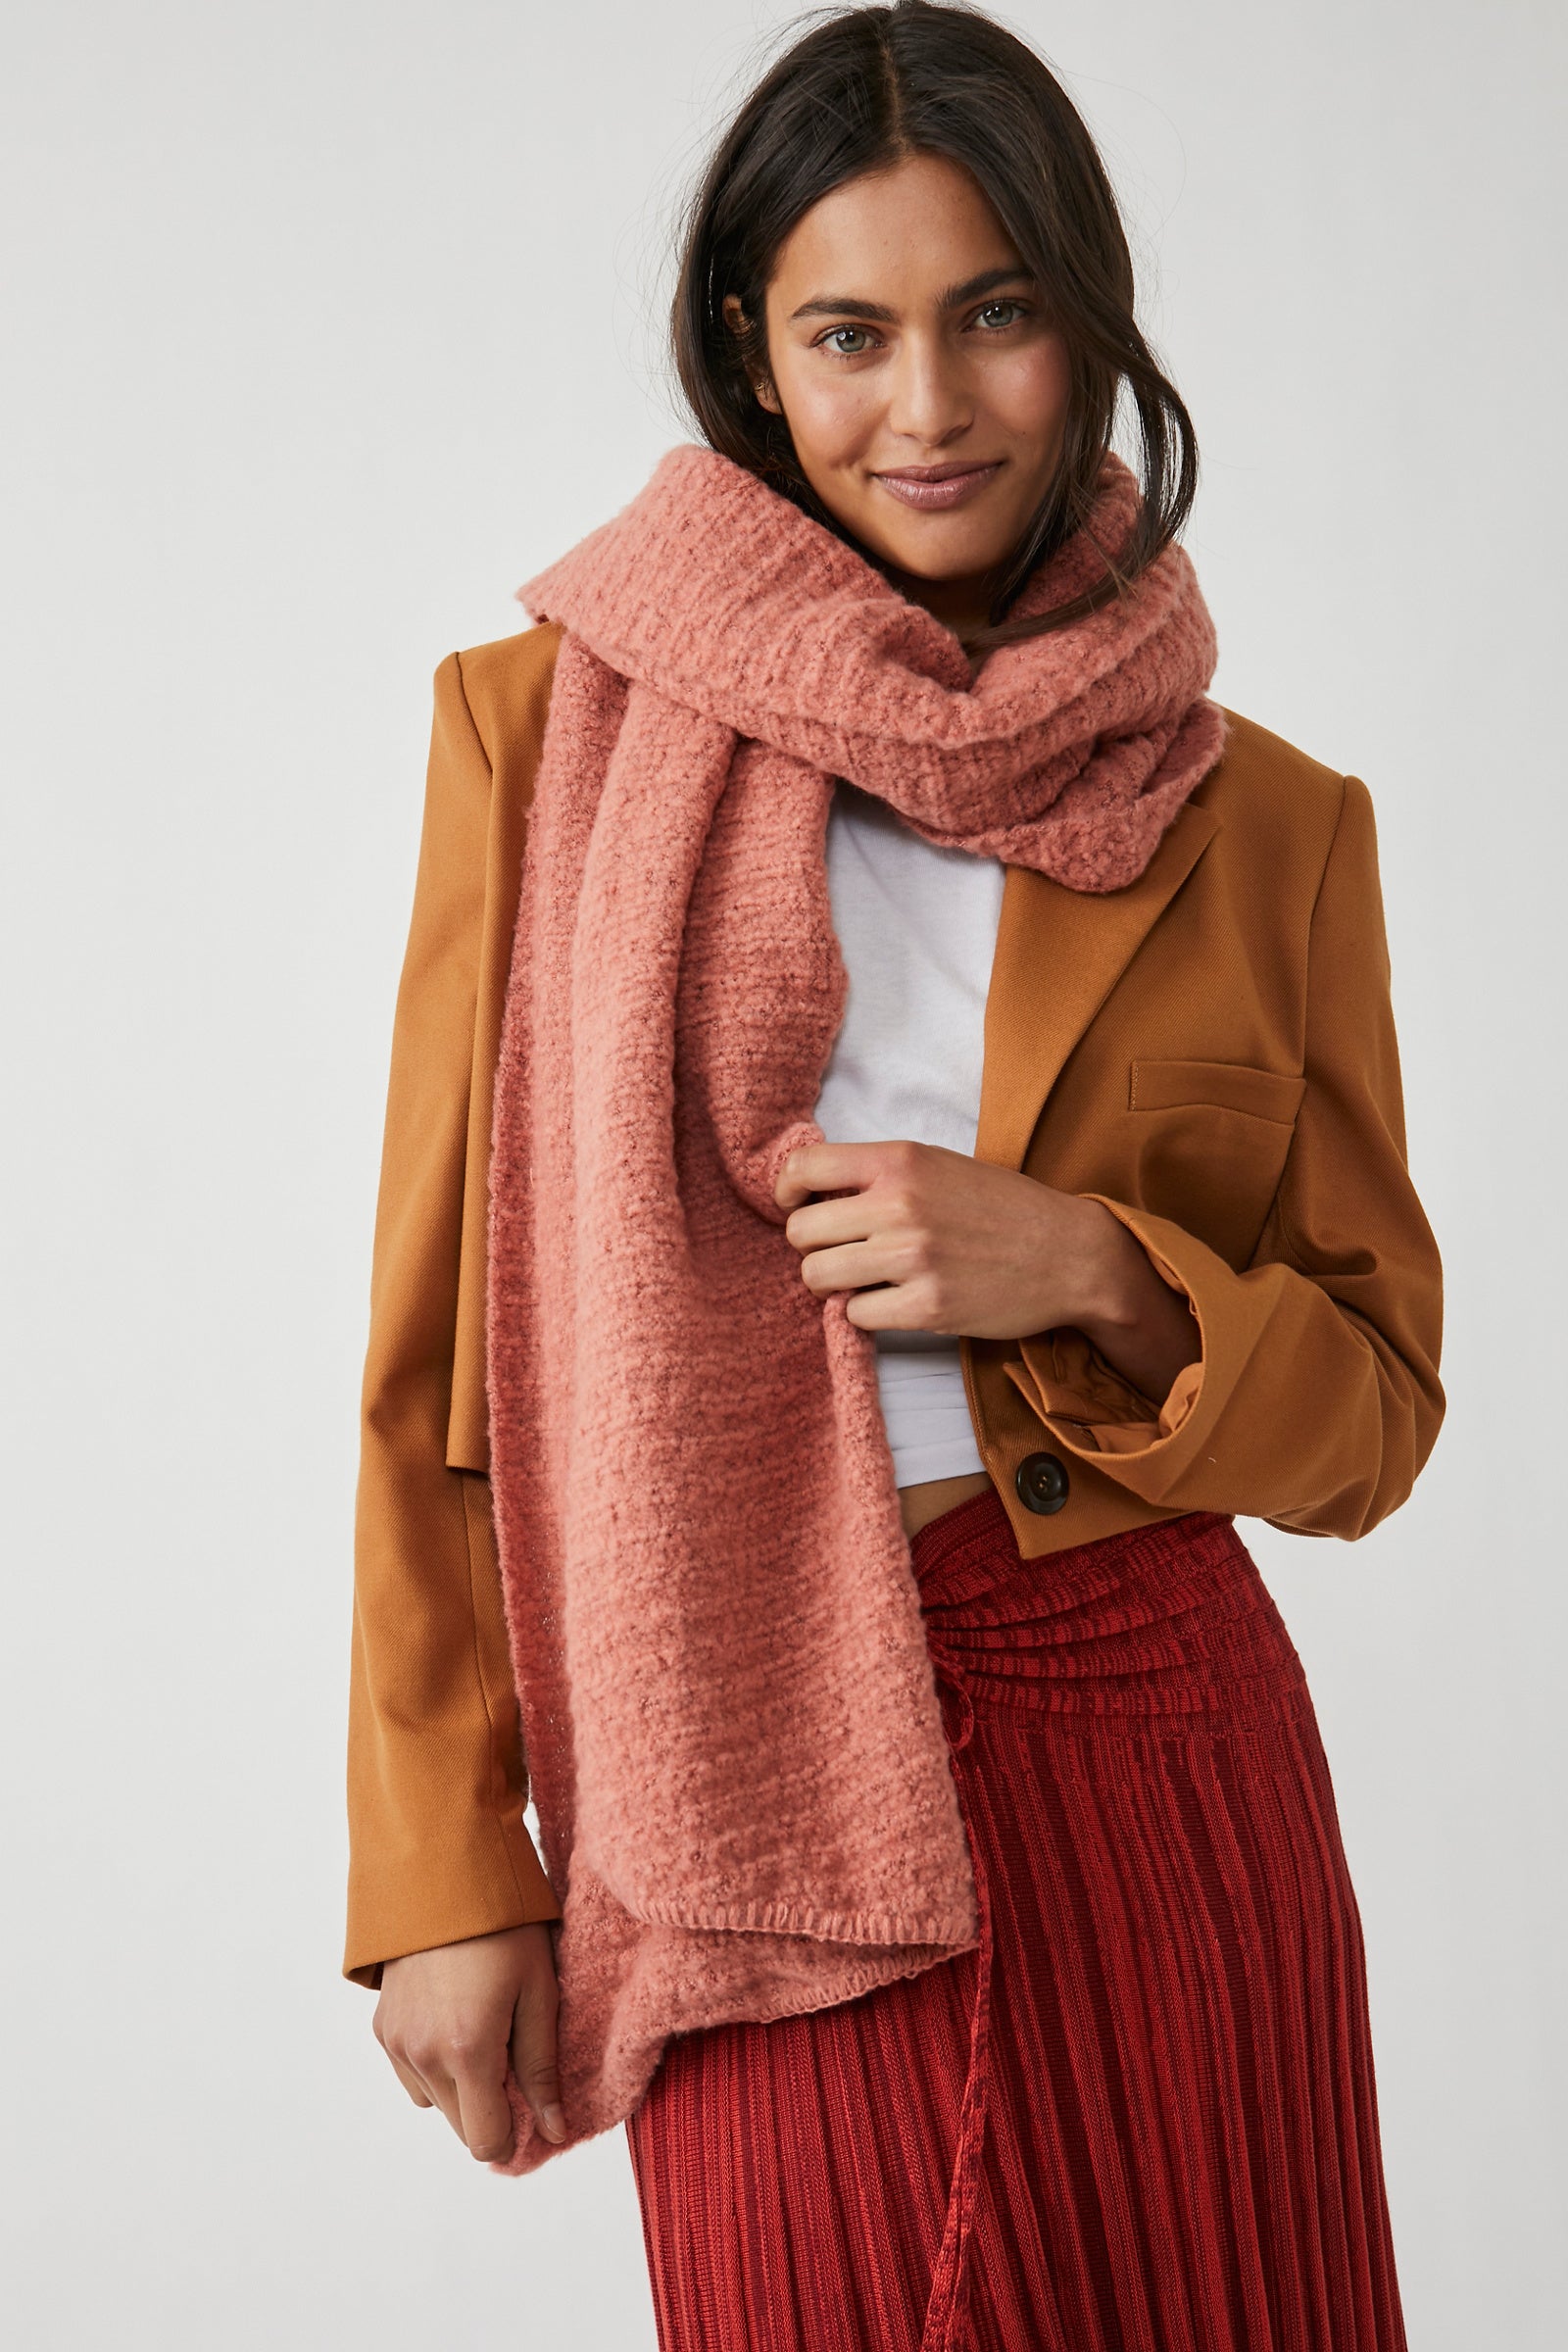 Ripple Recycled Blend Blanket Scarf in Terracotta